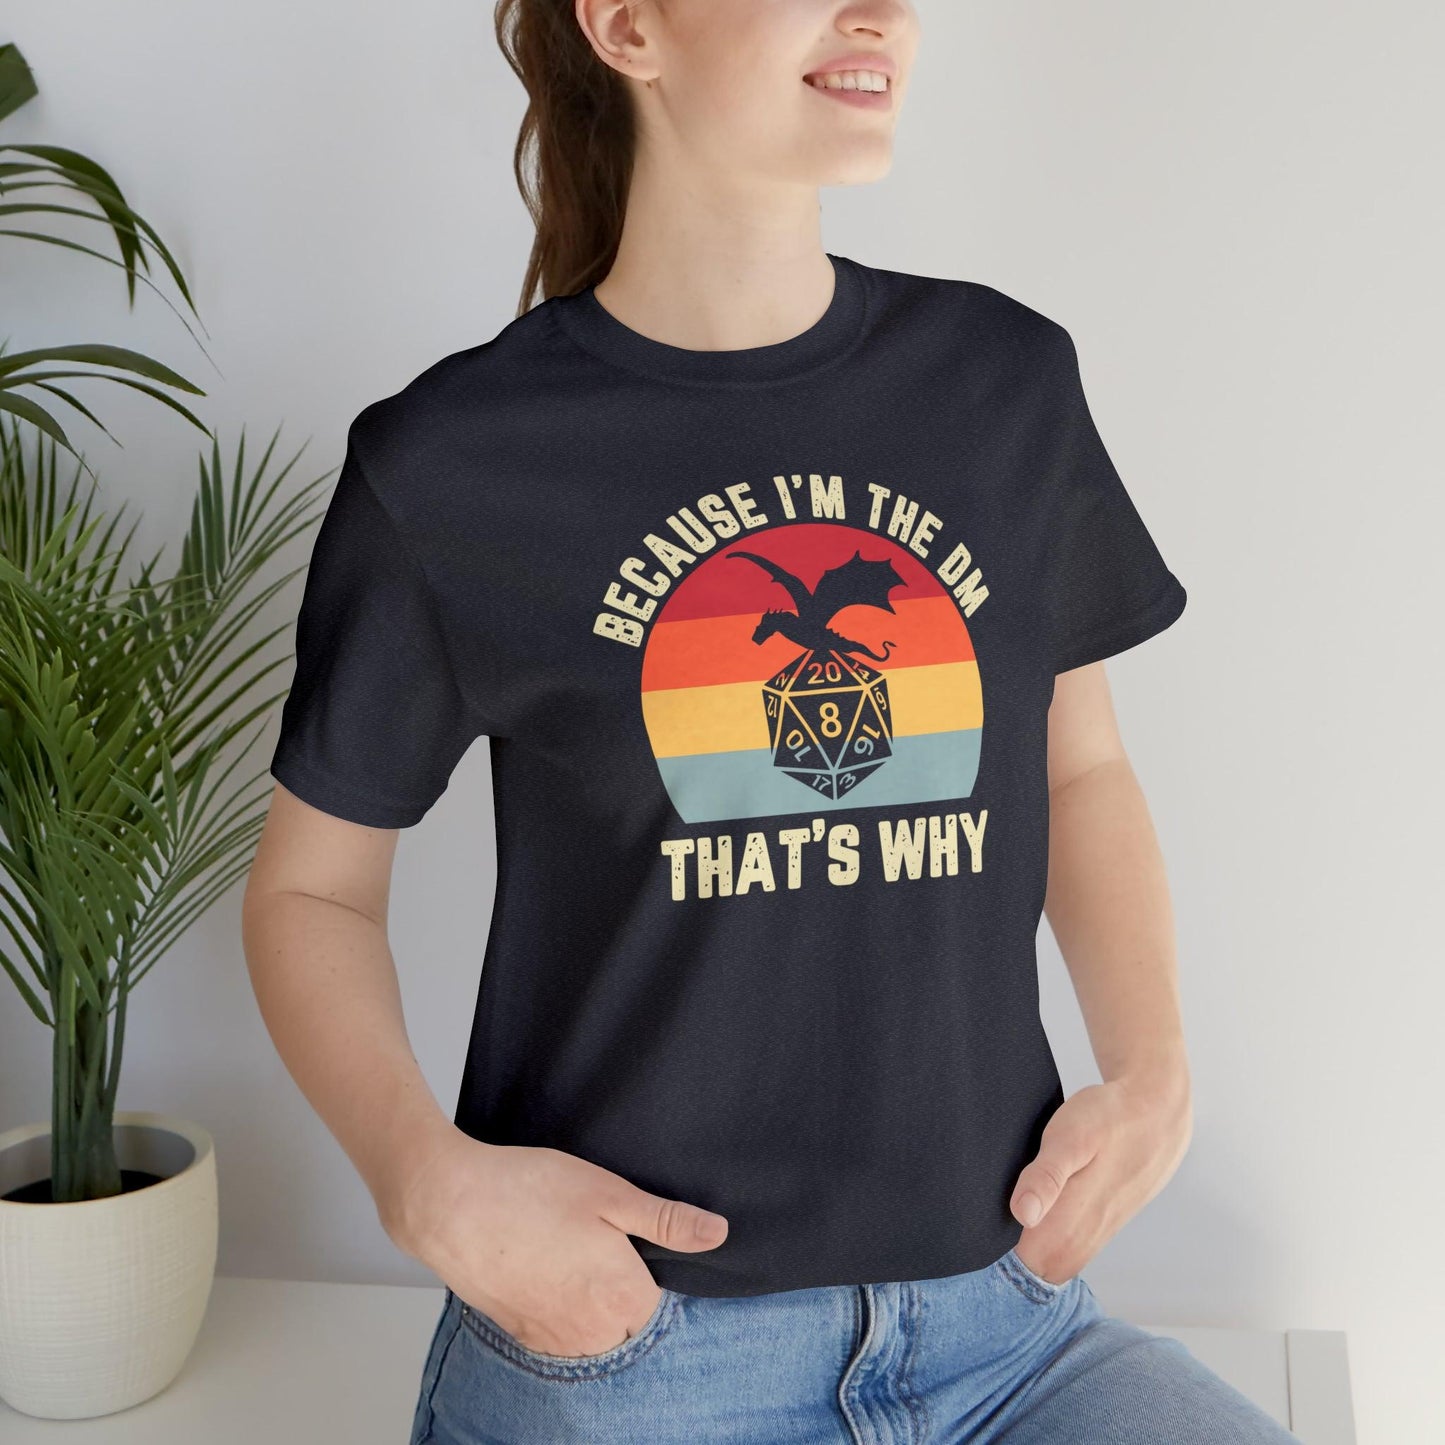 Because I'm the DM That's Why retro tee | Dm gift DM shirt | Dungeon Master gift | dnd tshirt | Nerd tshirt | dungeons and dragons gaming - Plague Miniatures shop for DnD Miniatures